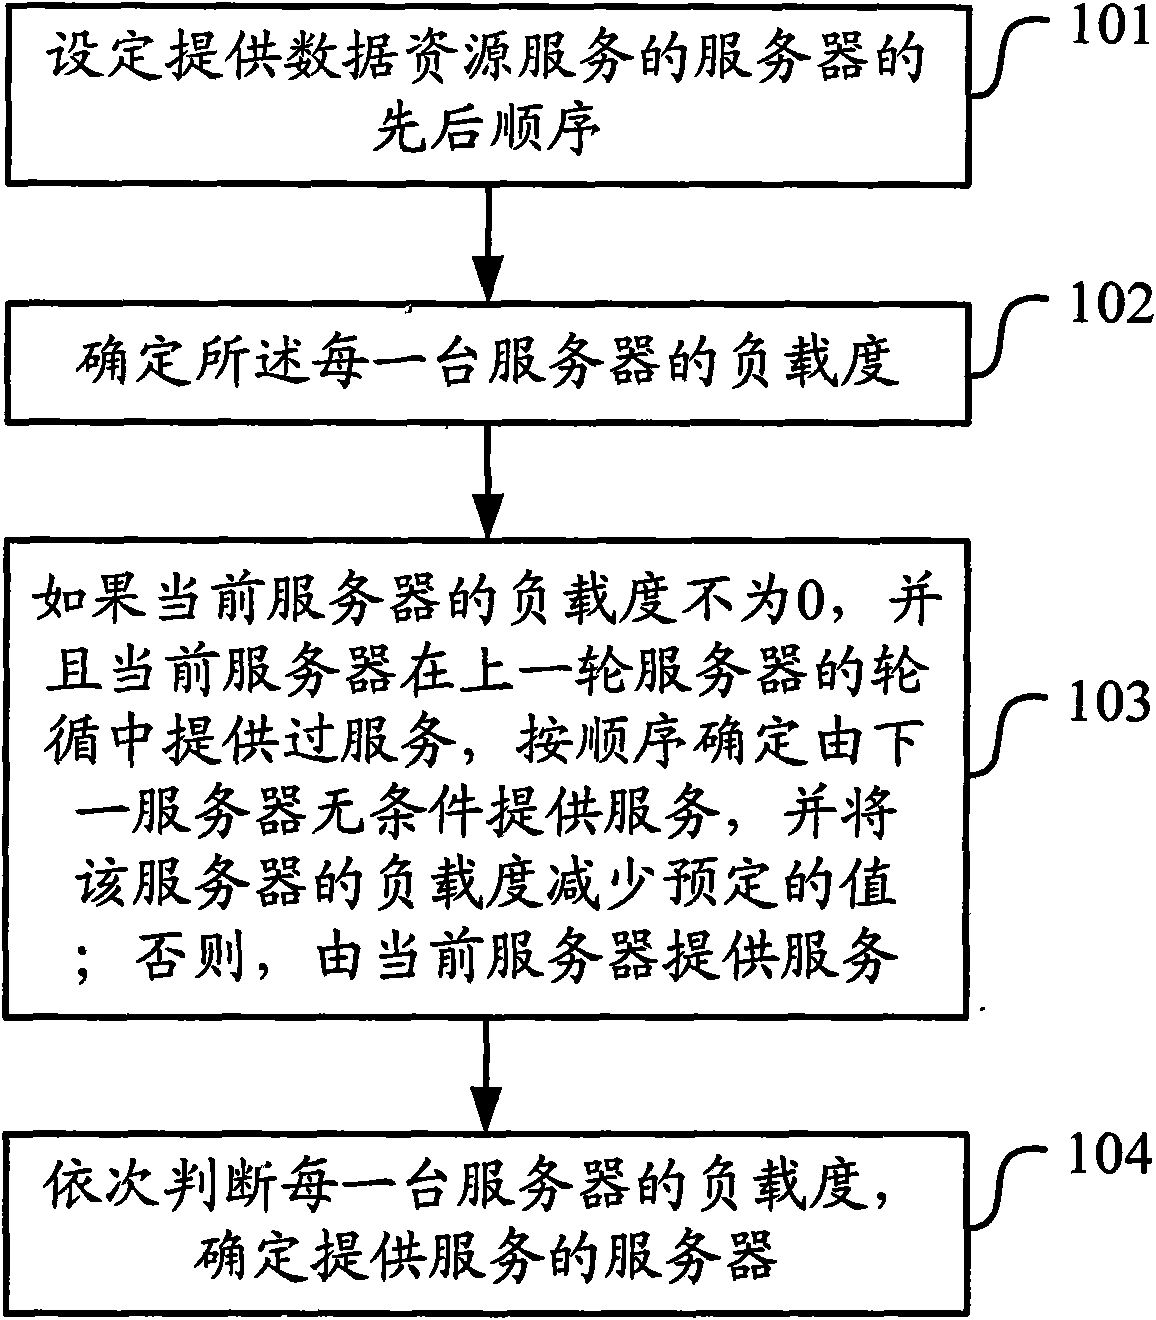 Load balancing method and equipment for data resources of servers